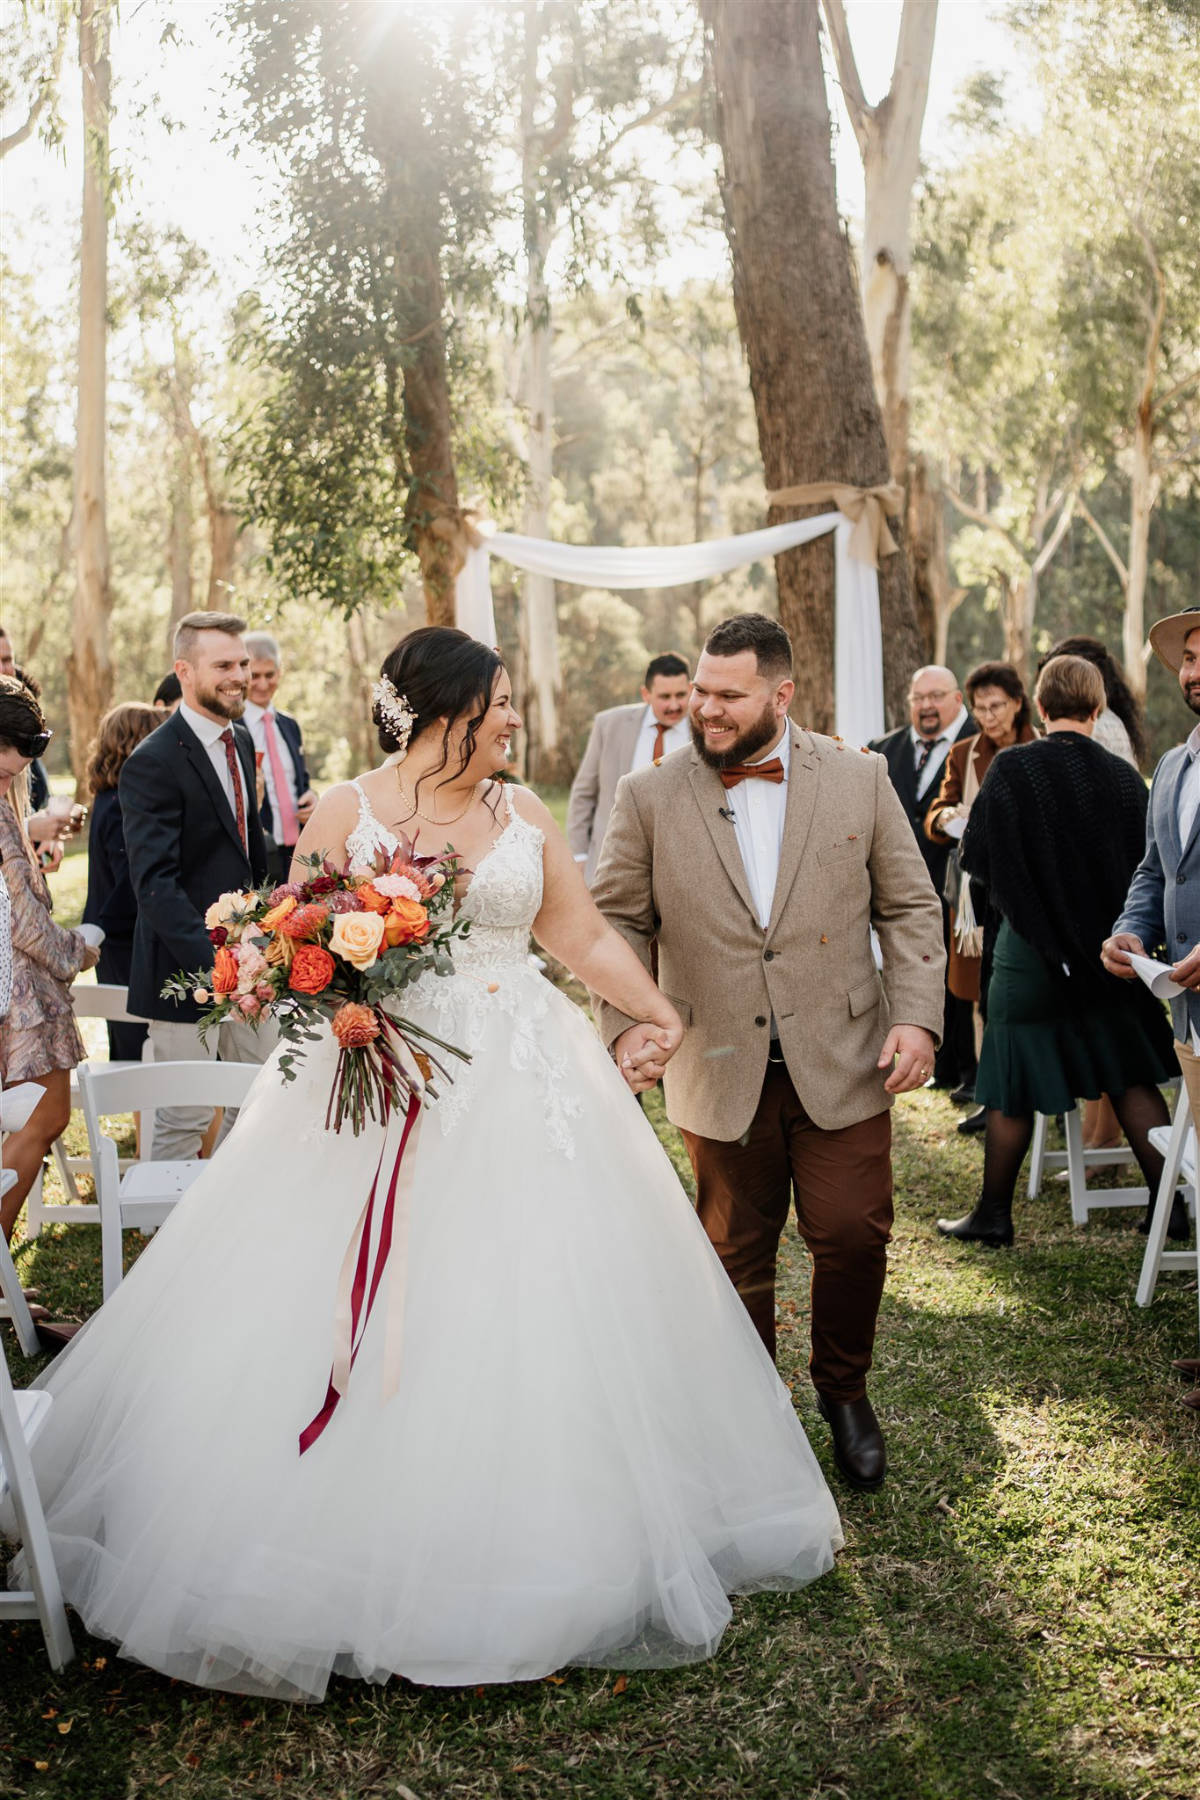 Modern rustic style at Tenayah and Josh's Gordon Country wedding in QLD, photographed by Sam Wyper Photography.